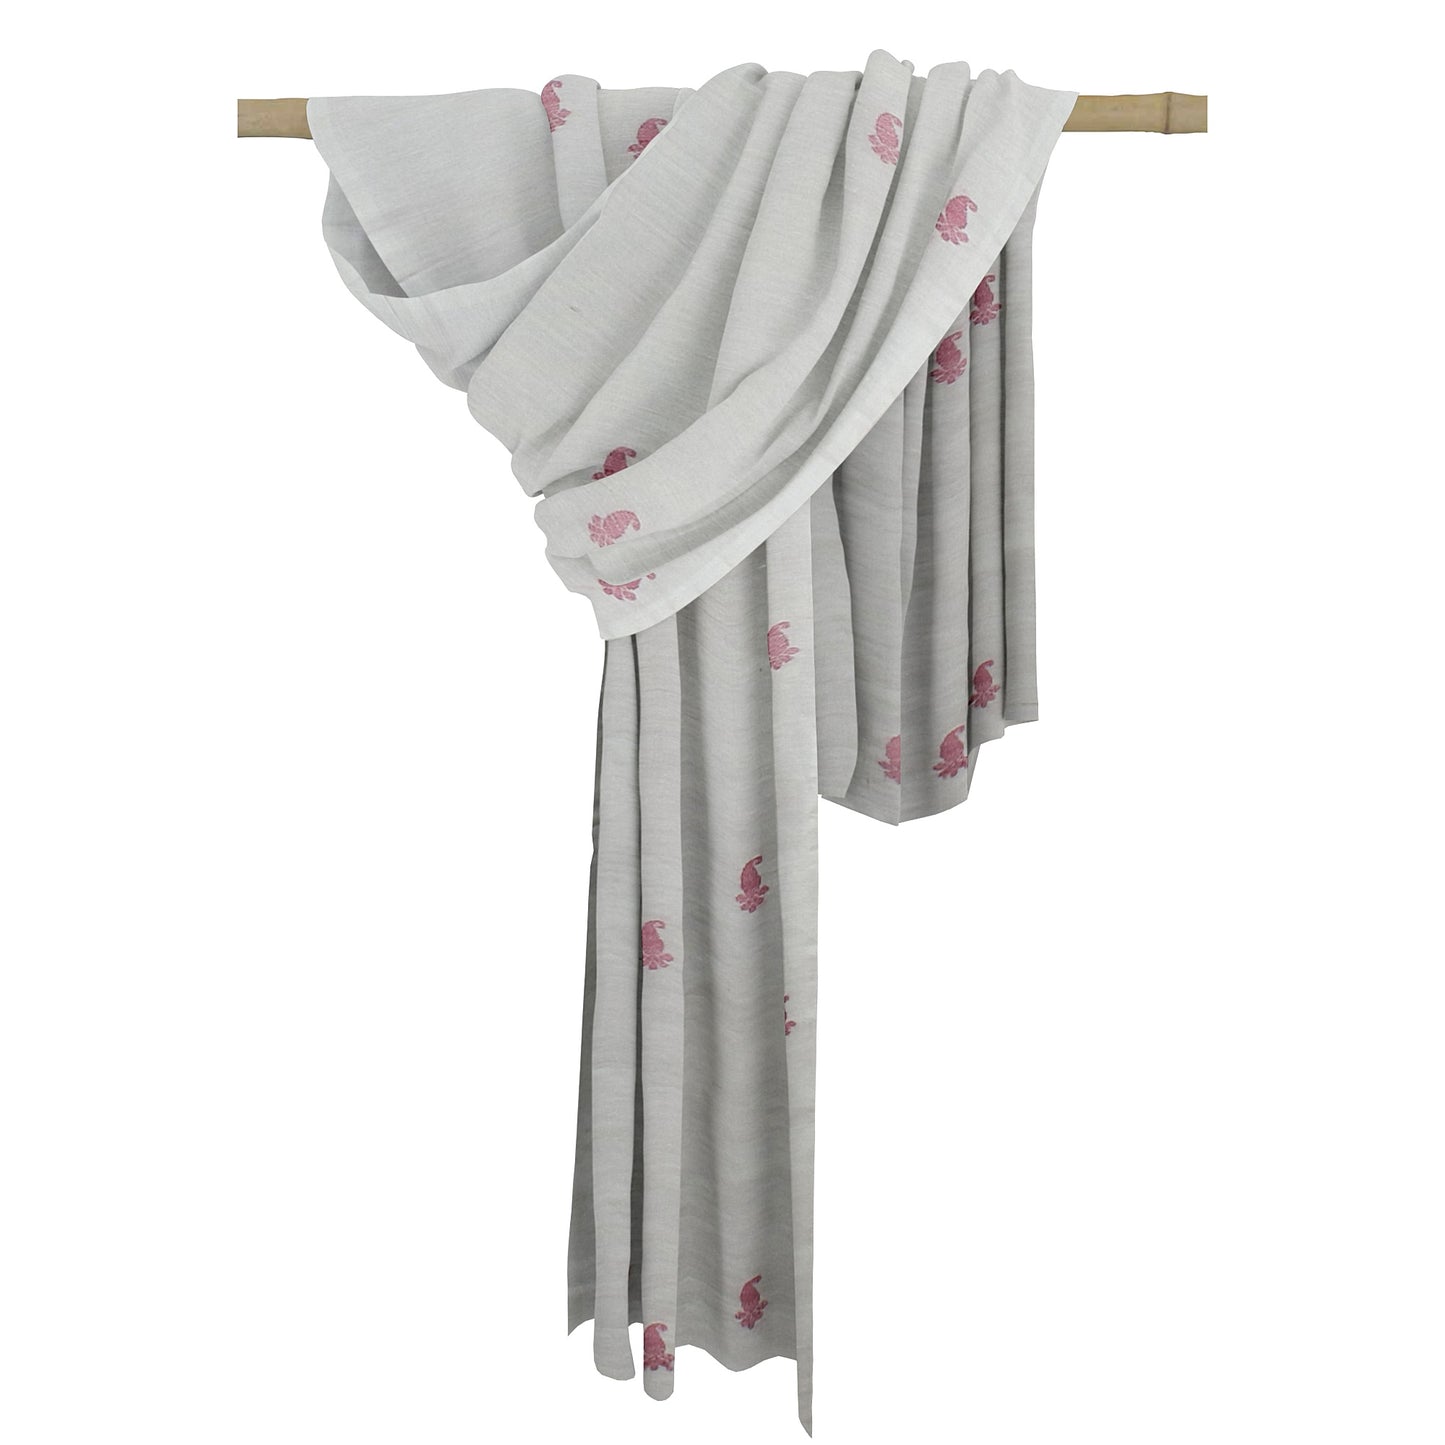 Mythili - Natural Dyed Pure Mulberry Silk Handloom Stole